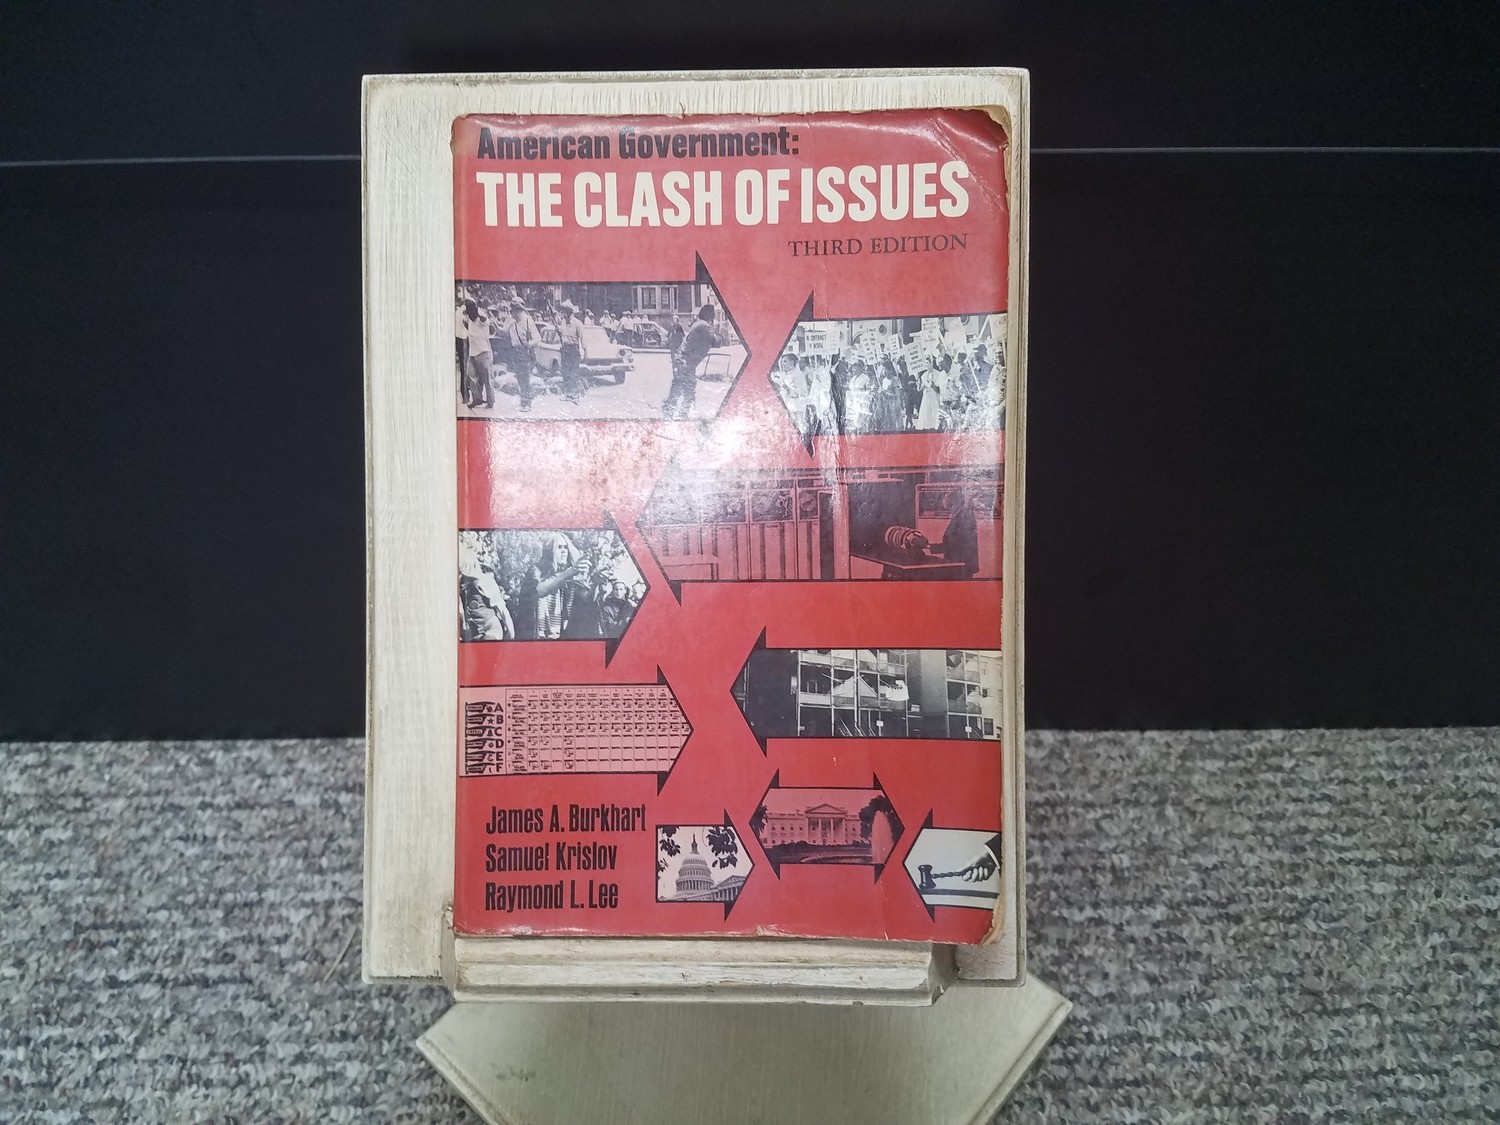 The Clash of Issues by James A. Burkhart, Samuel Krislov, and Raymond L. Lee